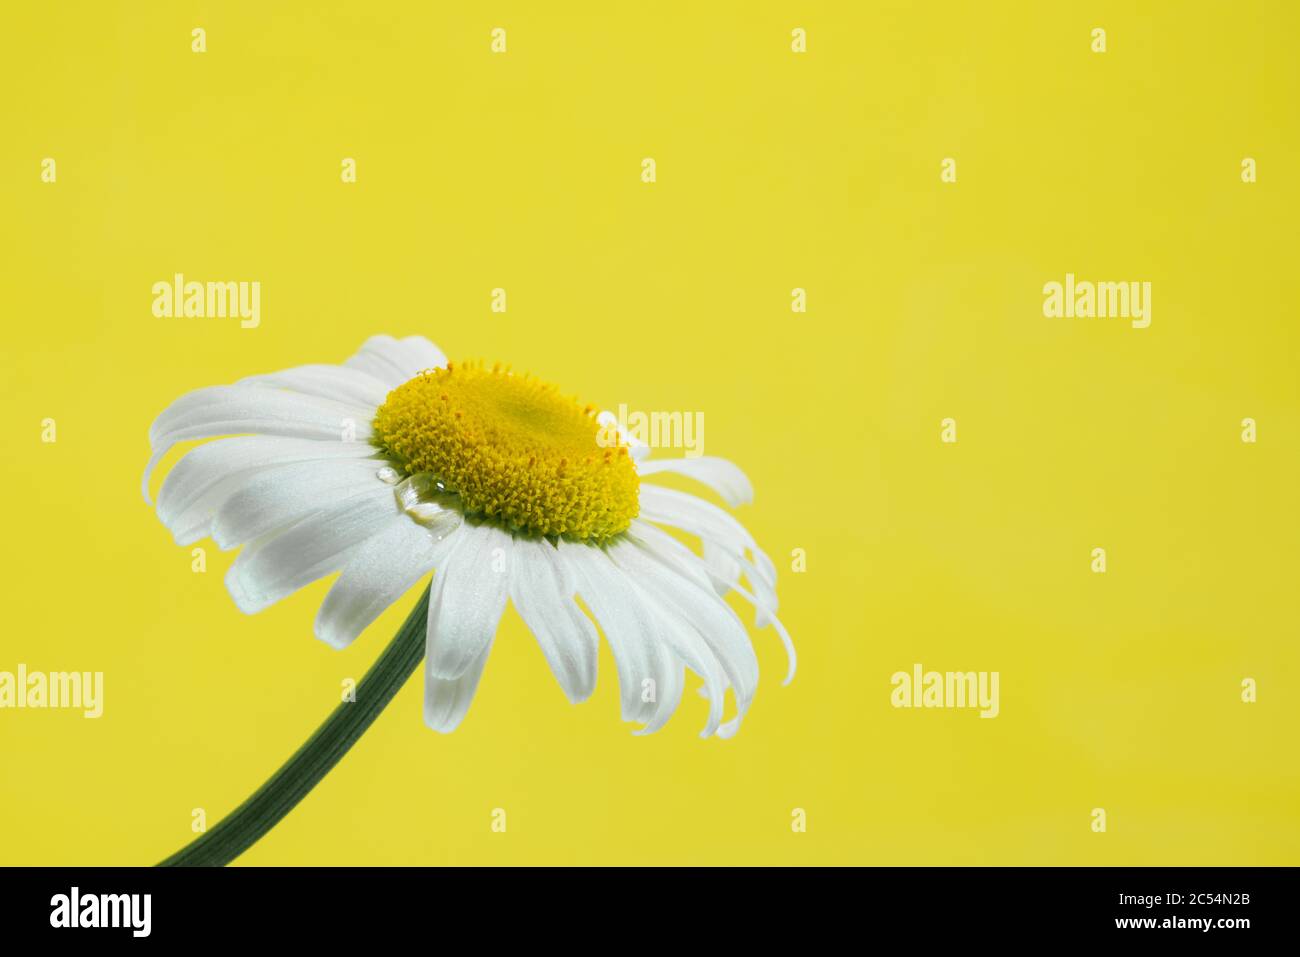 fresh as a daisy concept with a white daisy side view select focus with a drop of dew on the petals and a bright yellow background Stock Photo